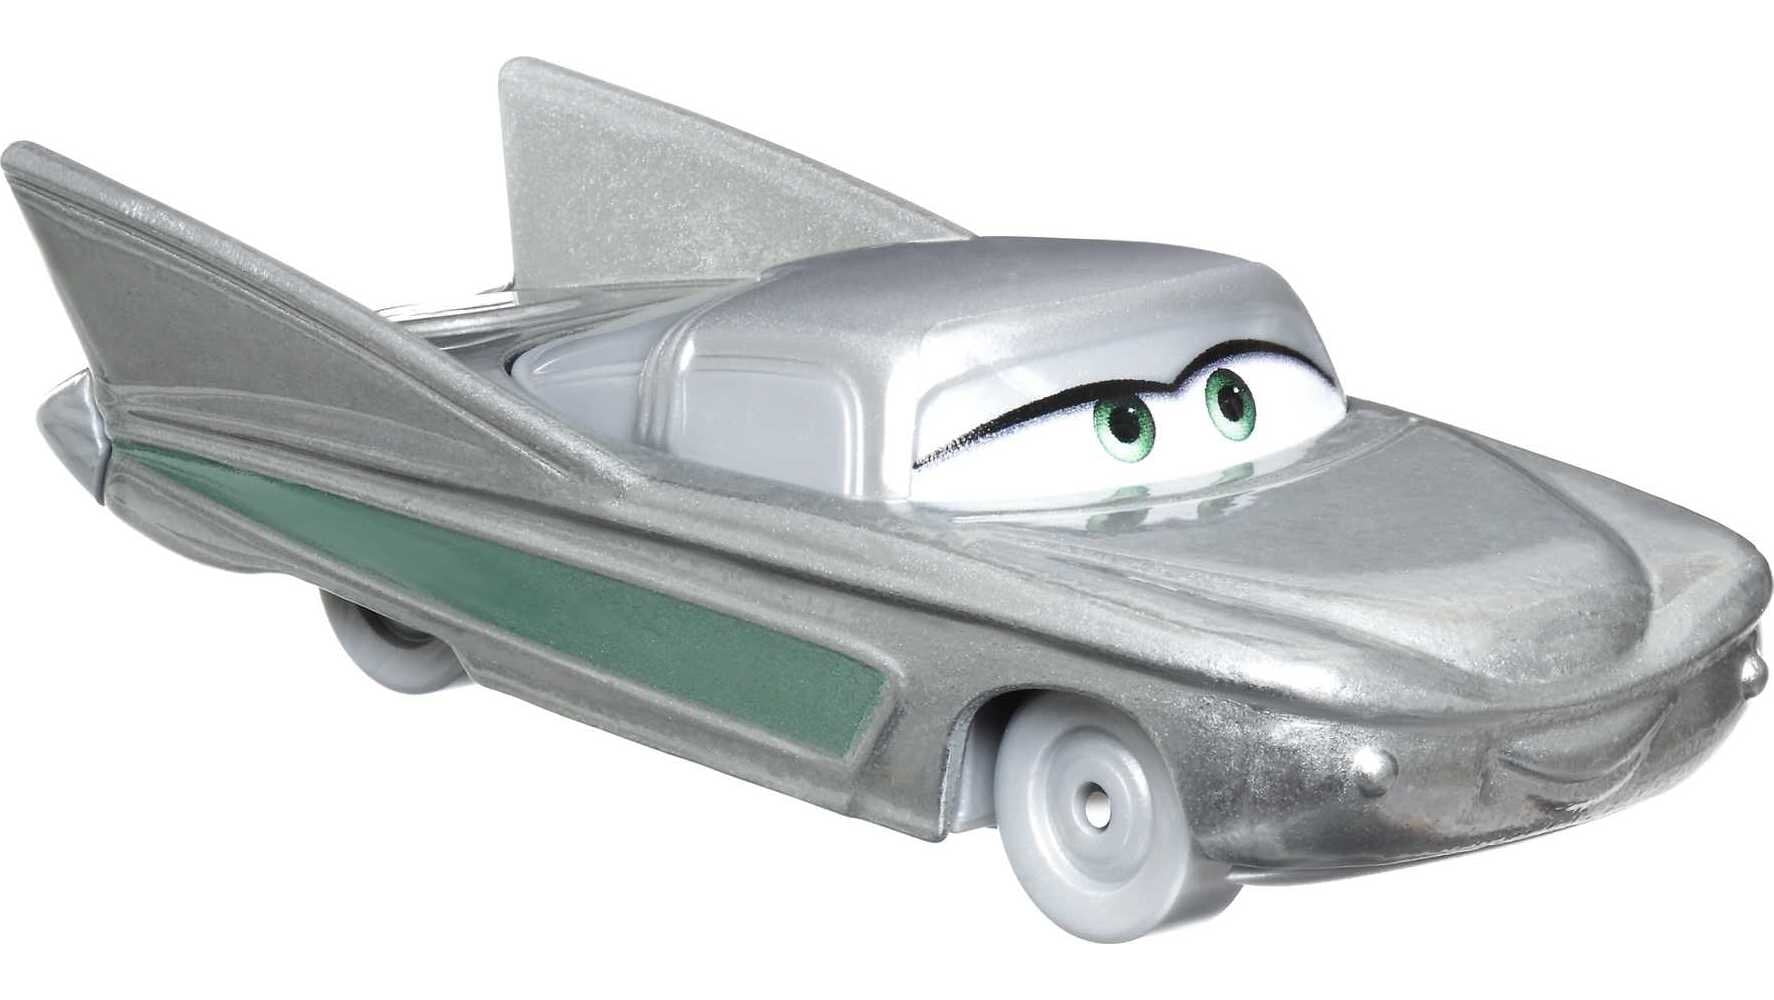 Disney and Pixar Cars Flo Die-Cast Toy Character Car, 1:55 Scale Disney100  Collectible Vehicle